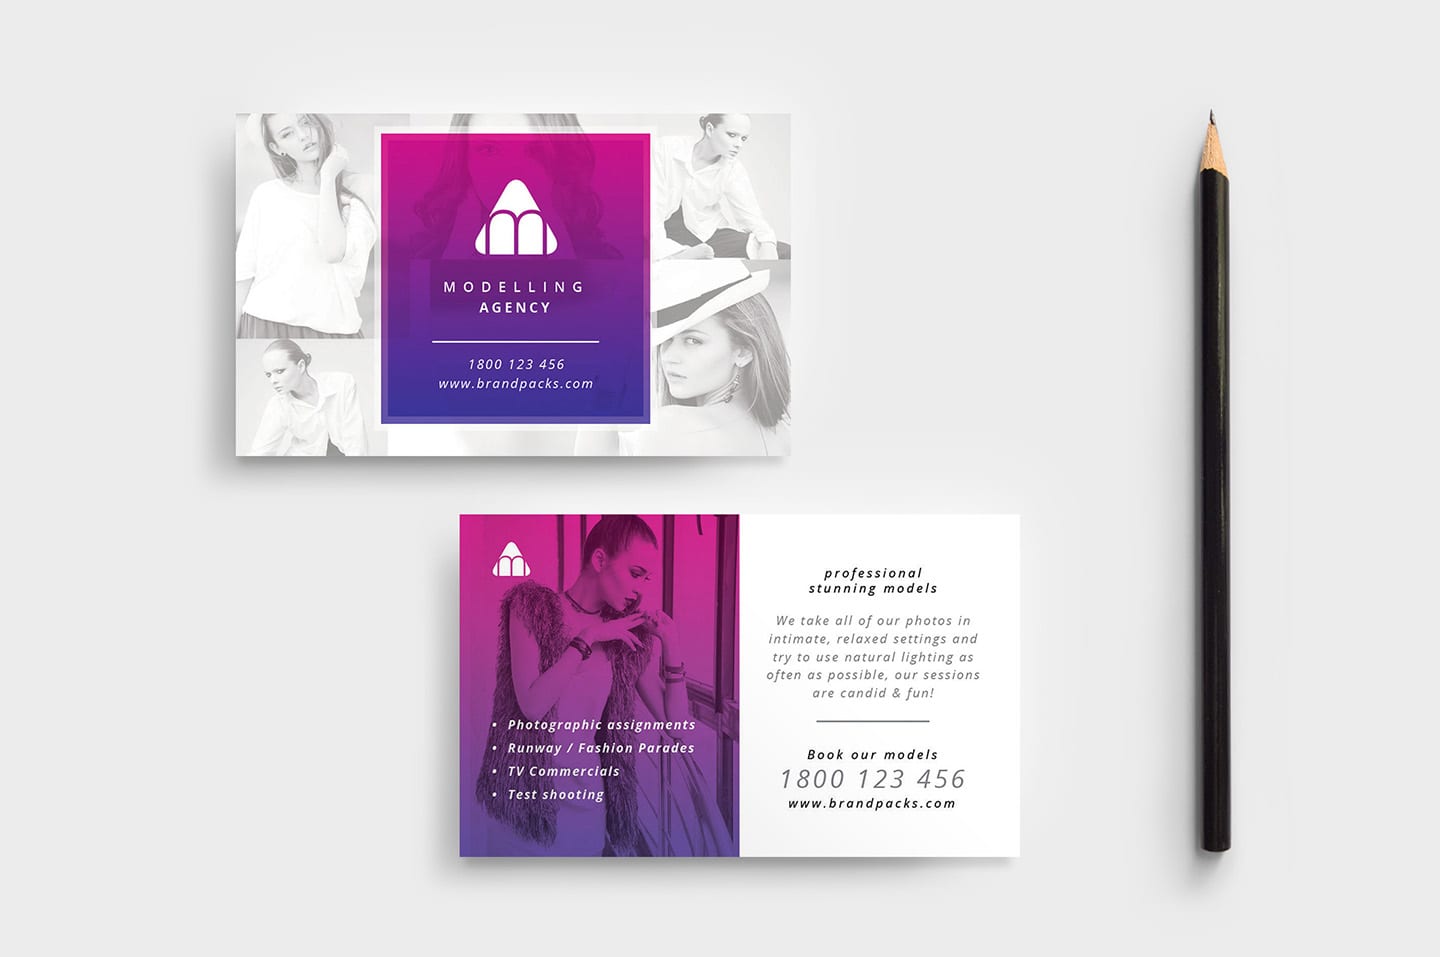 Modelling Agency Business Card Template